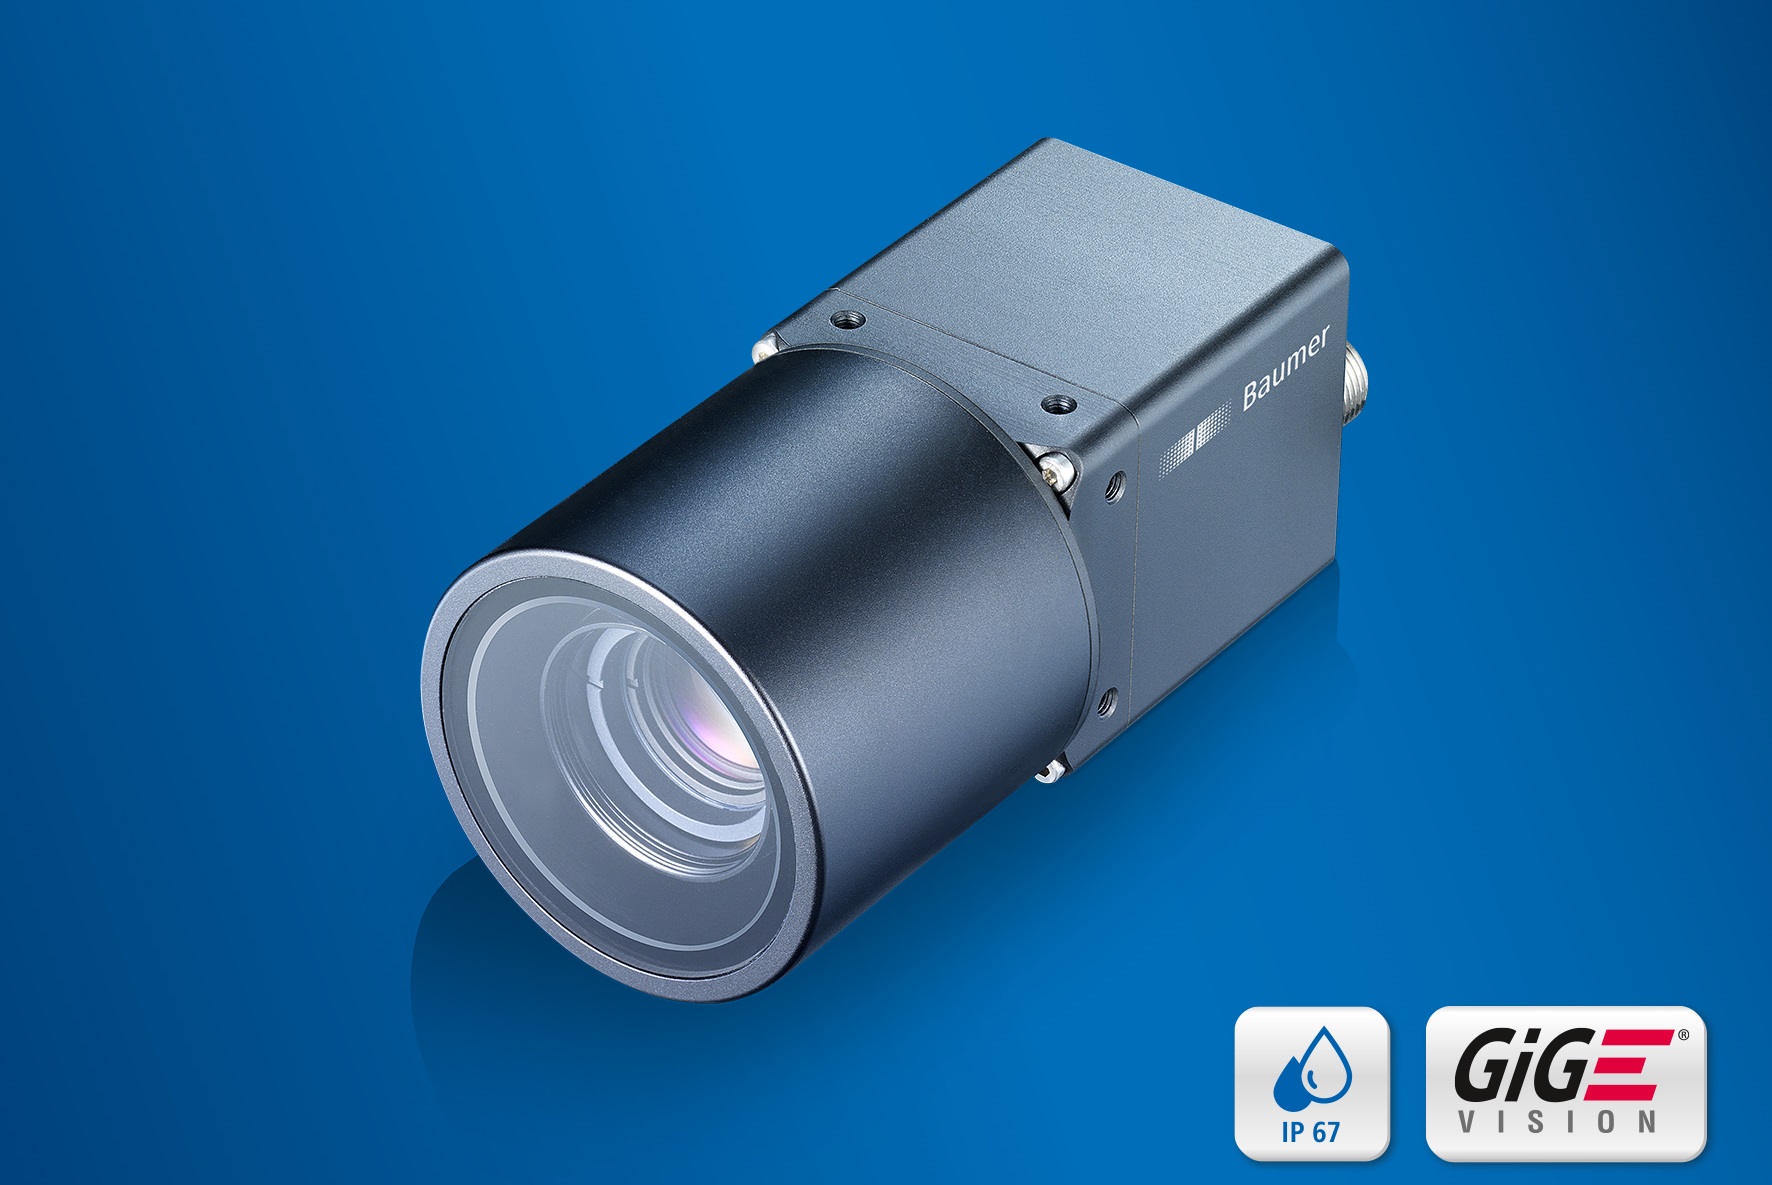 The new IP 65/67 rated CX cameras endure dust, water jets and extreme temperatures from 70 °C down to -40 °C.